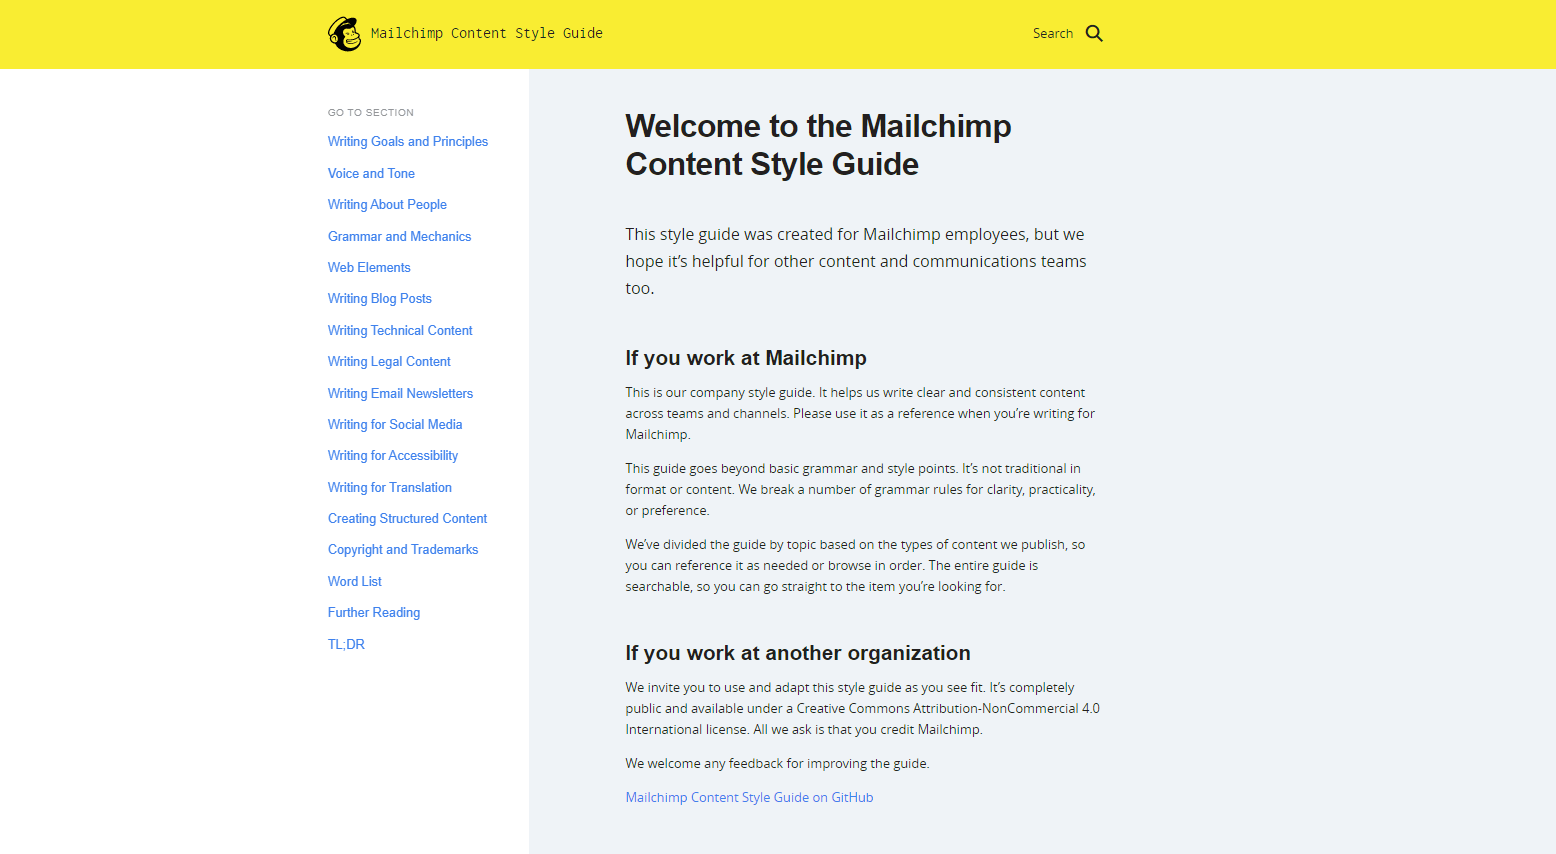 Microsite example - Mailchimp Content Style Guide